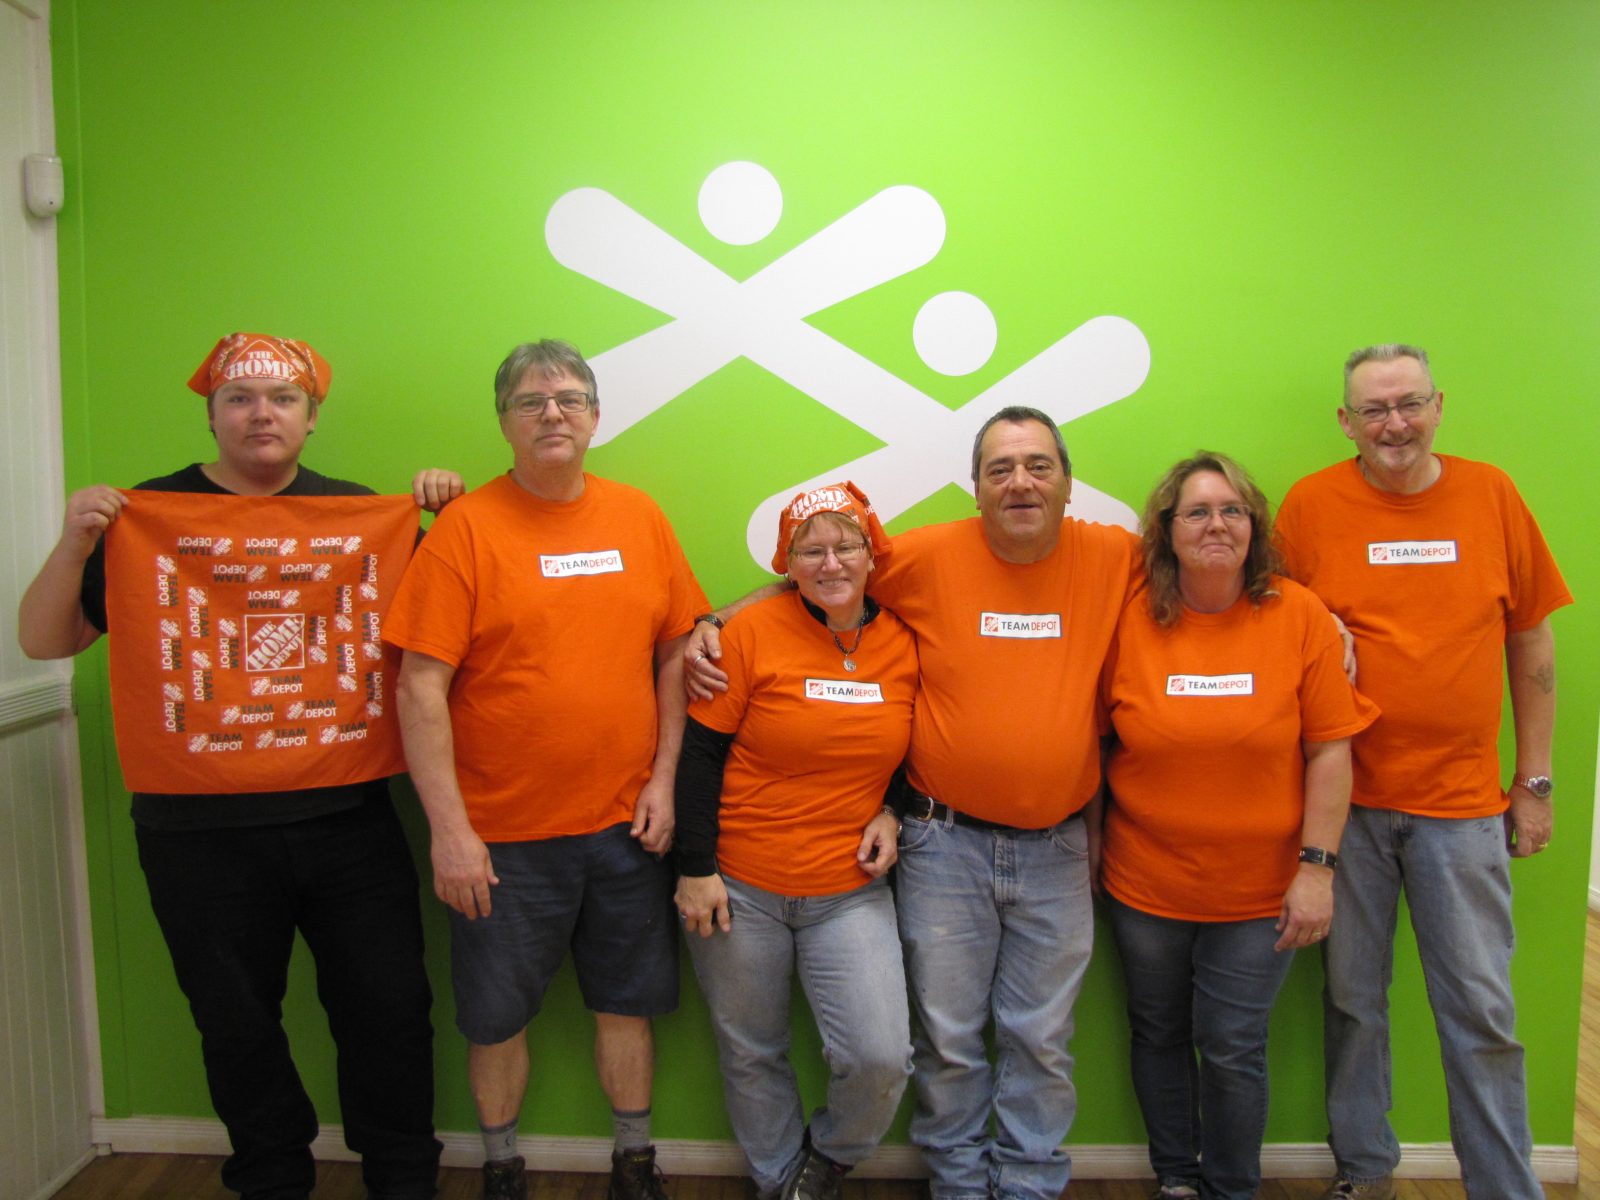 Home Depot brings colour to the Boys and Girls Club